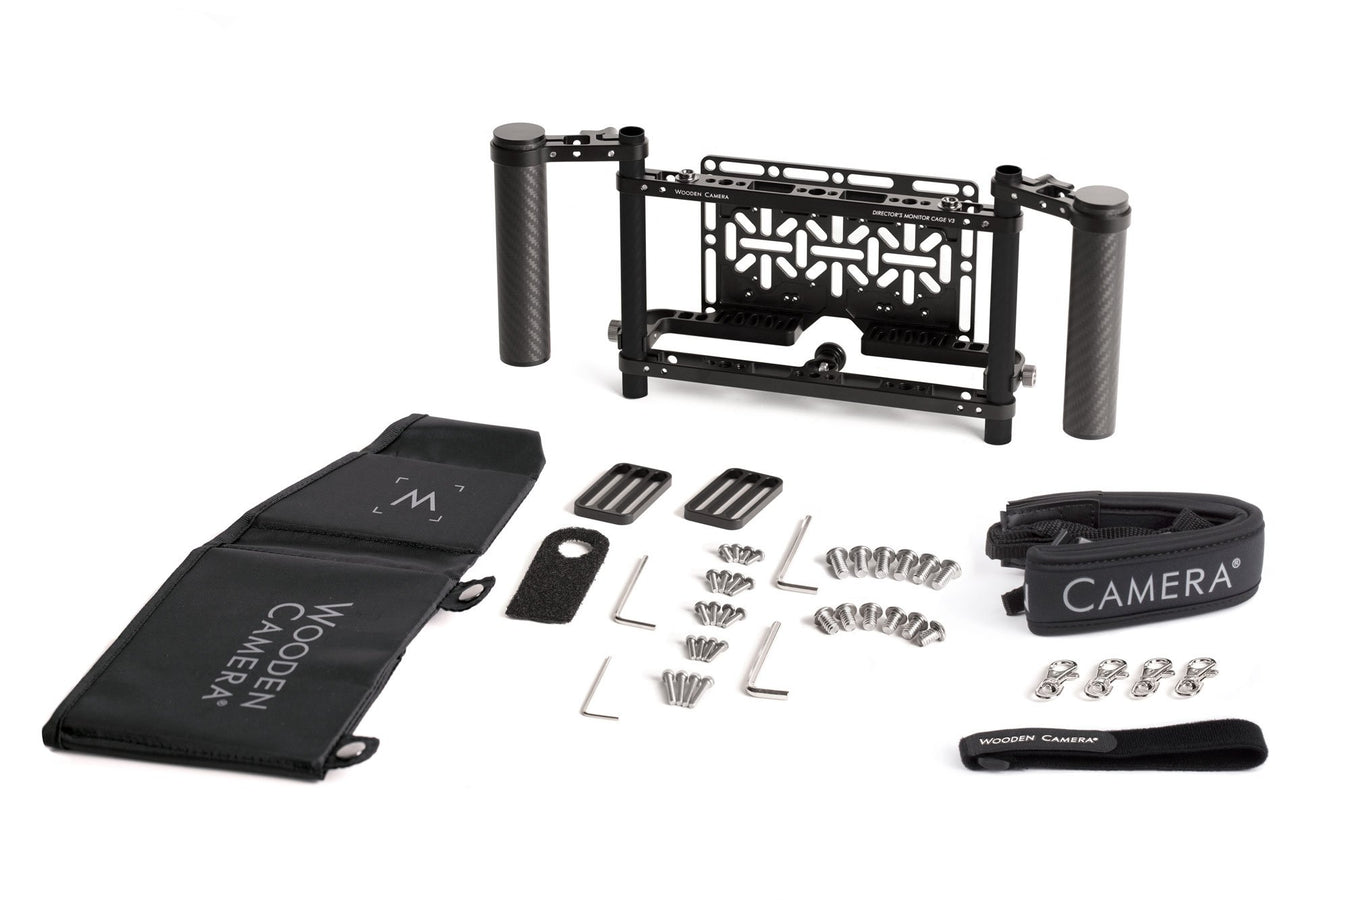 Director's Monitor Cage Kits and Accessories